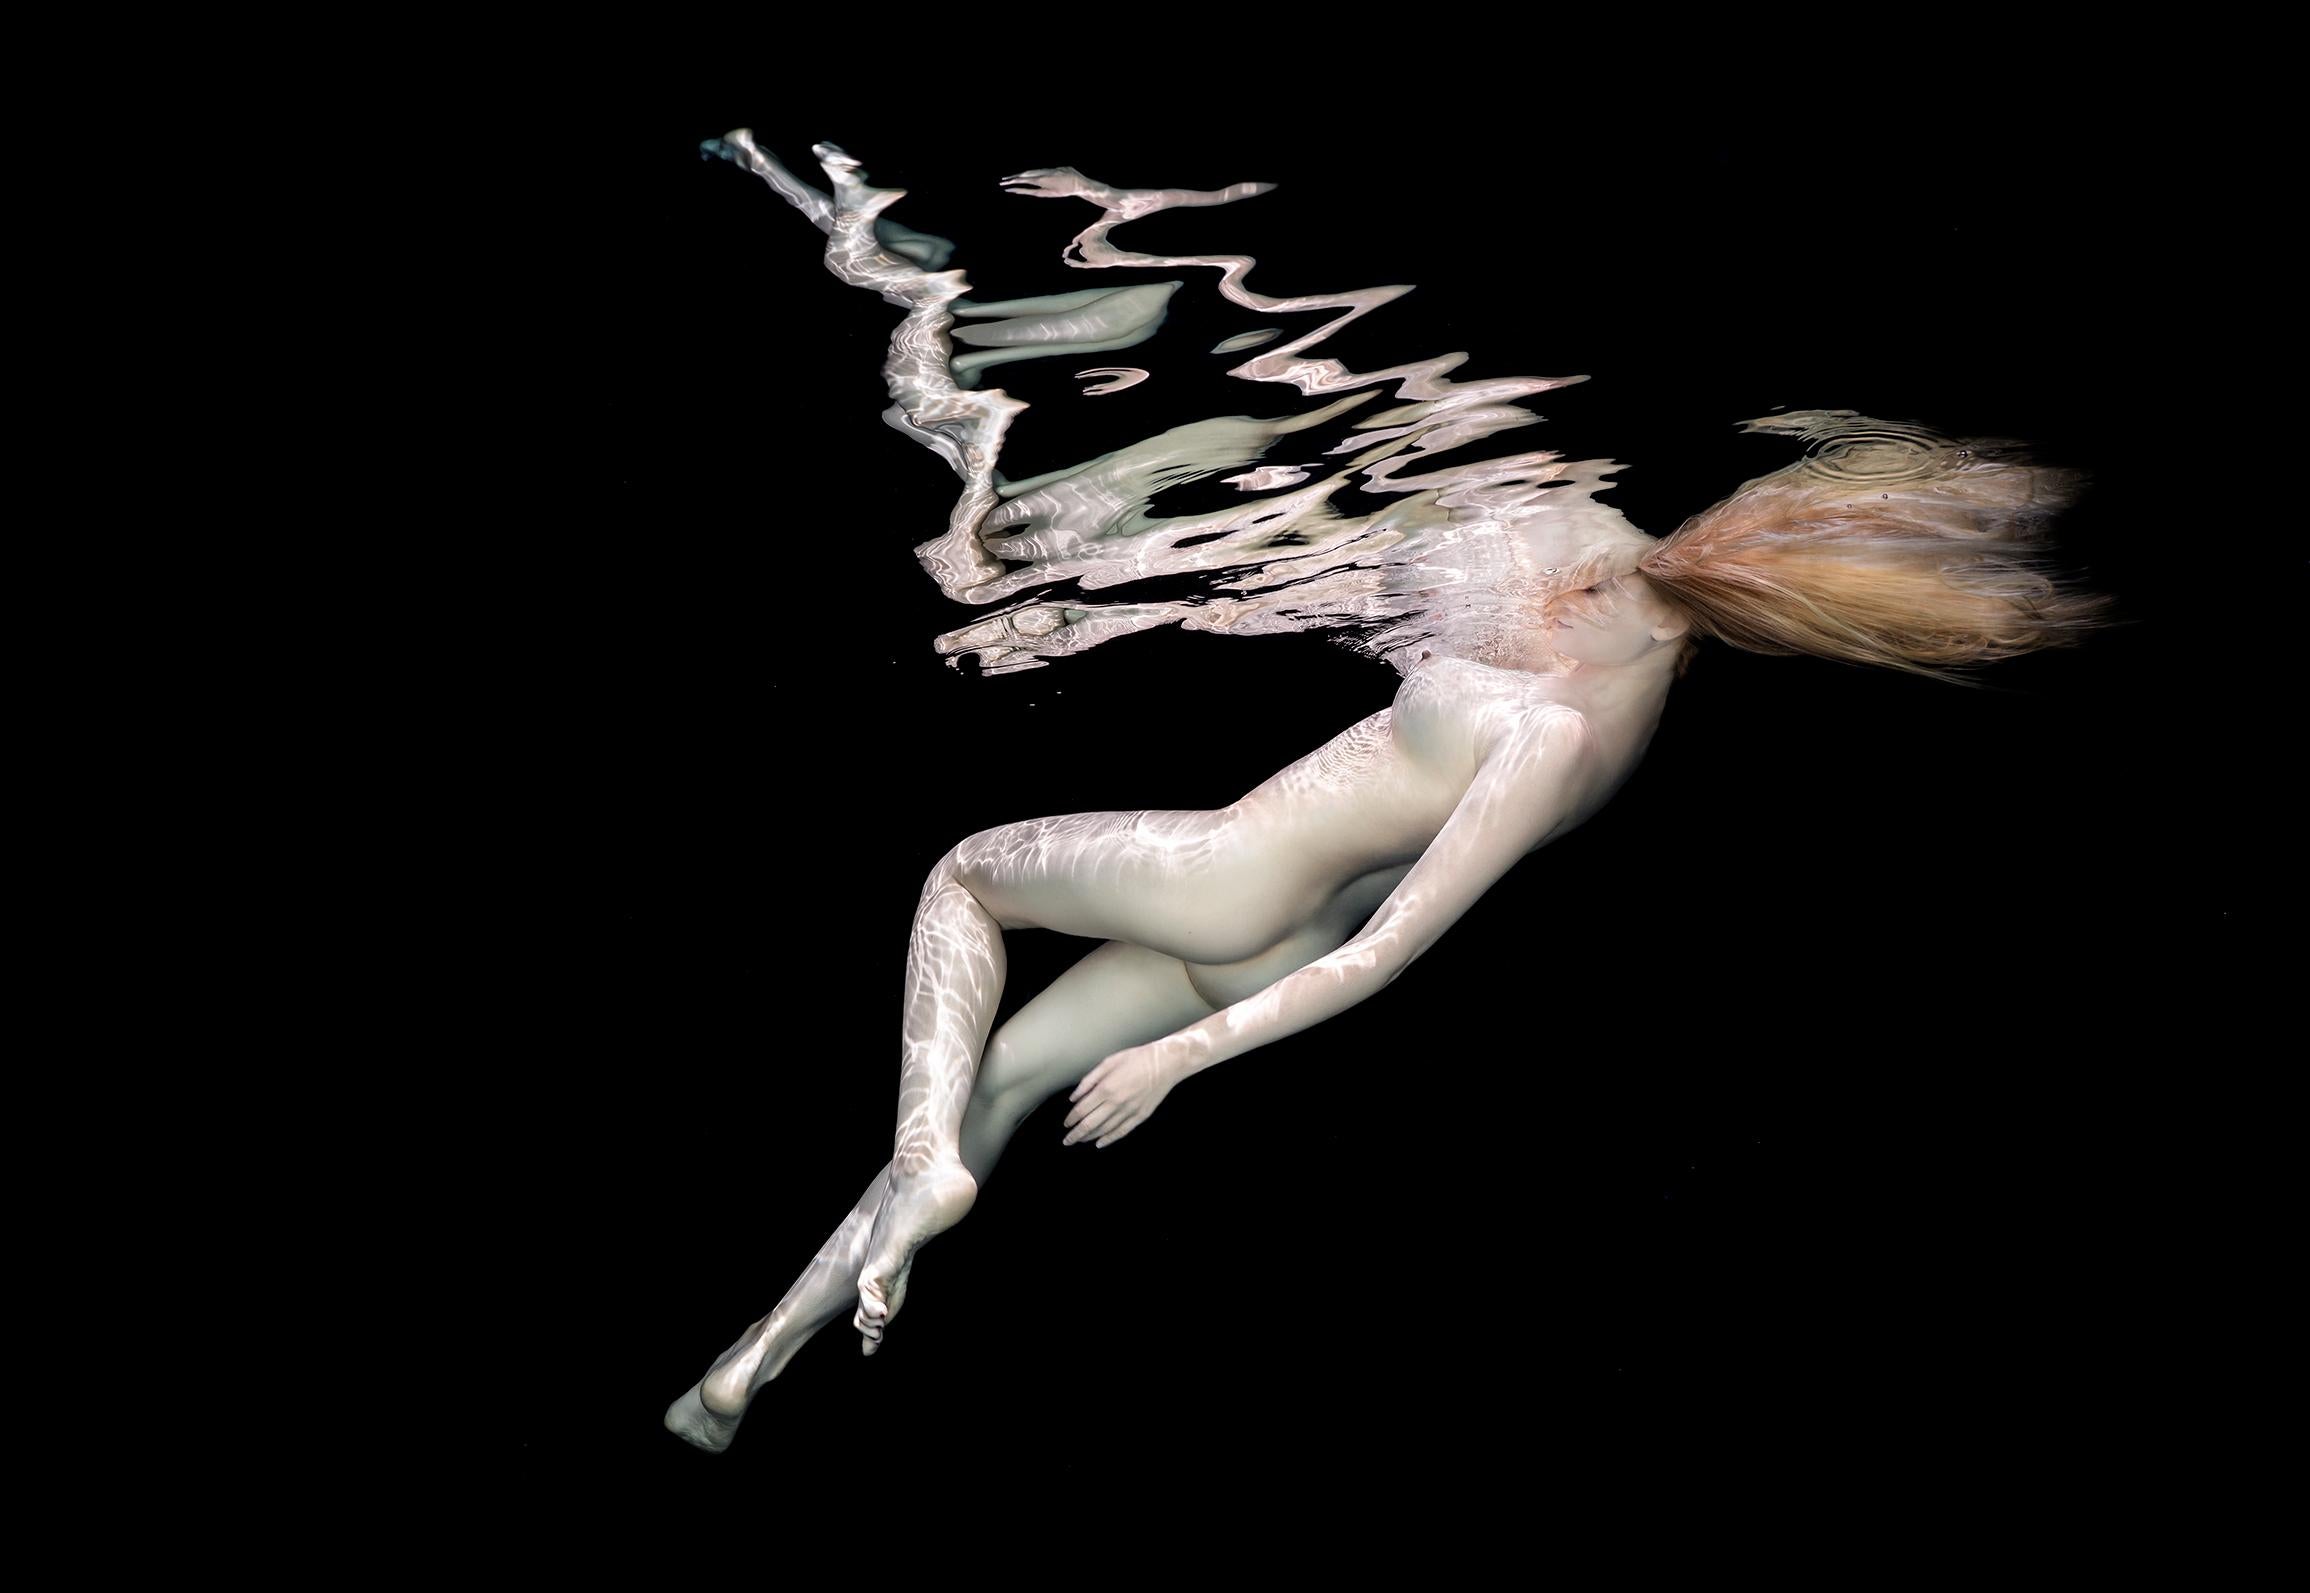 Alex Sher Nude Photograph - Porcelain III - underwater nude photograph - archival pigment print 43" x 64"